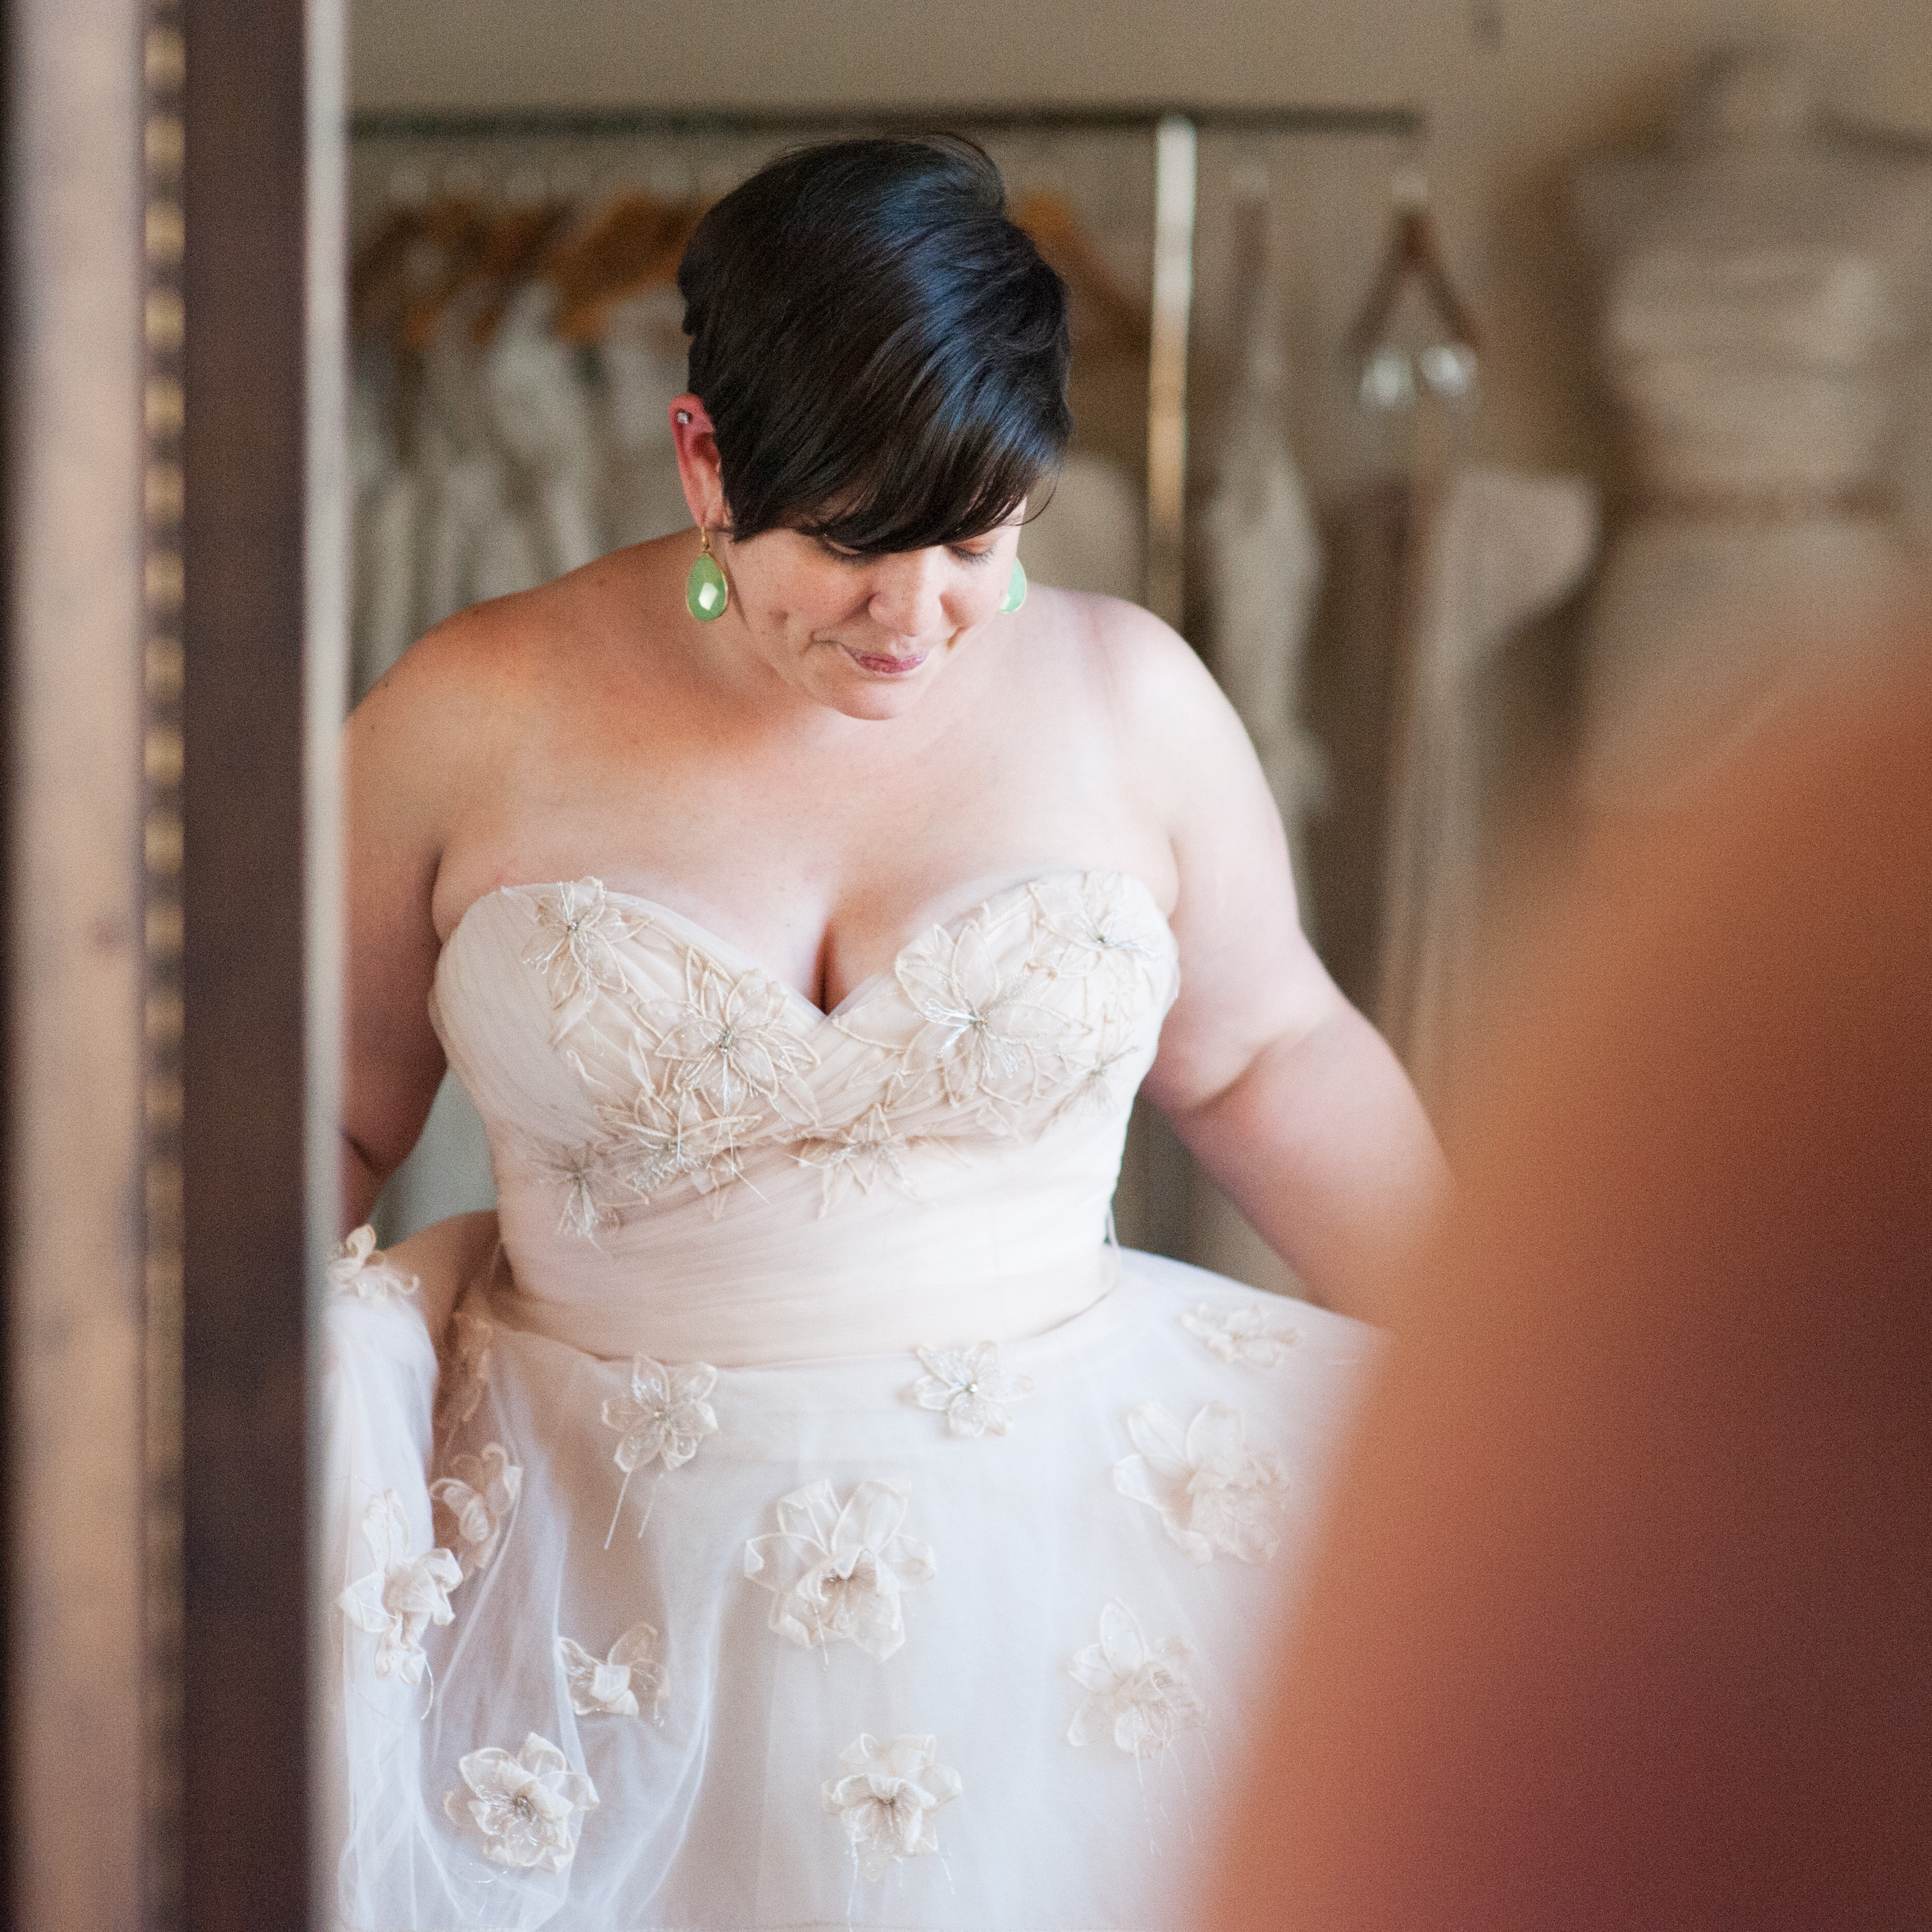 Why Is Plus Size Bridesmaid Dress Shopping So Brutal?